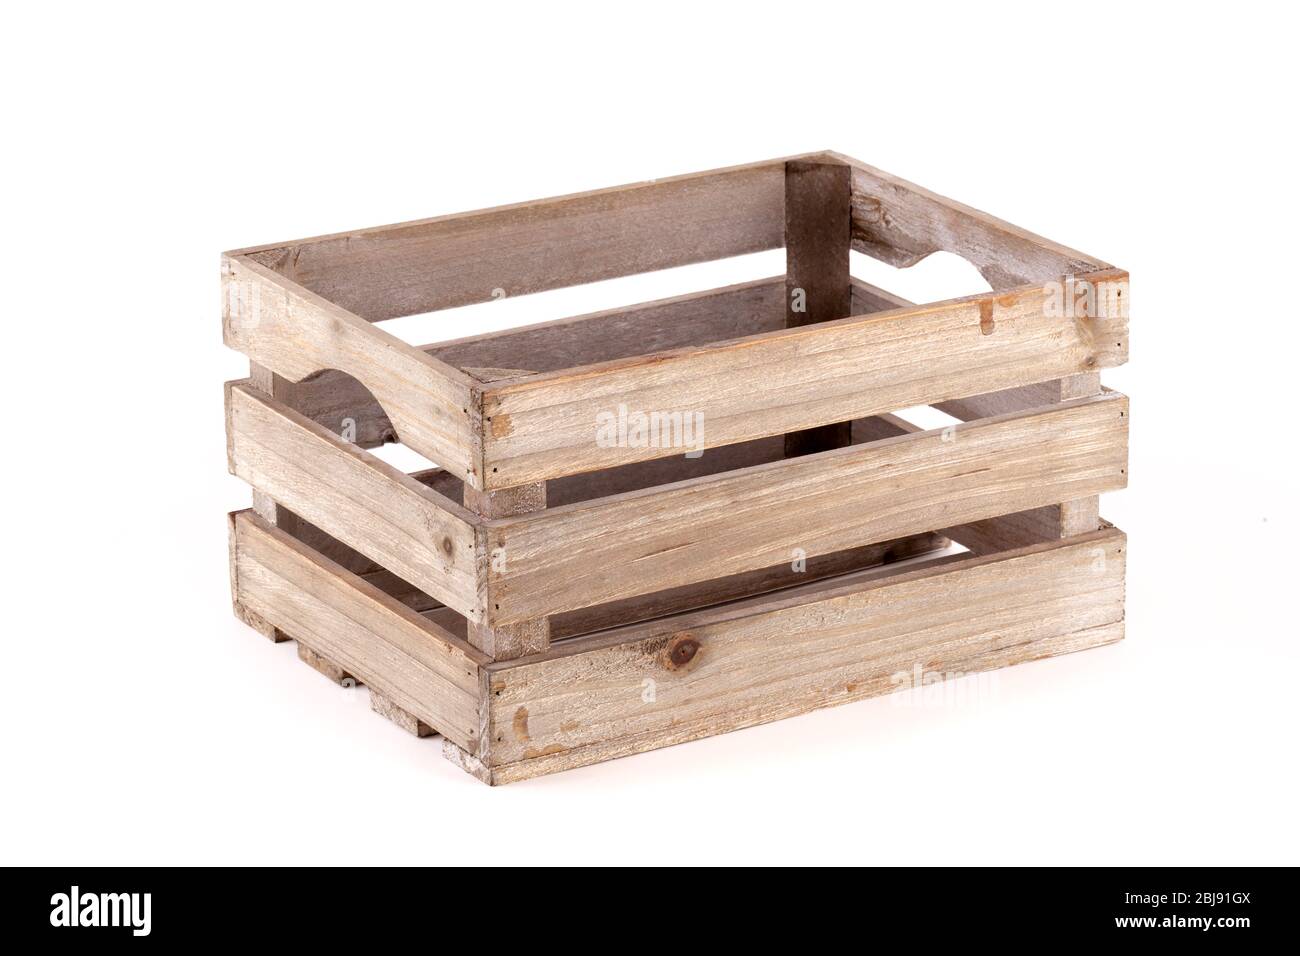 Empty Fruit Crate Box High Resolution Stock Photography and Images - Alamy